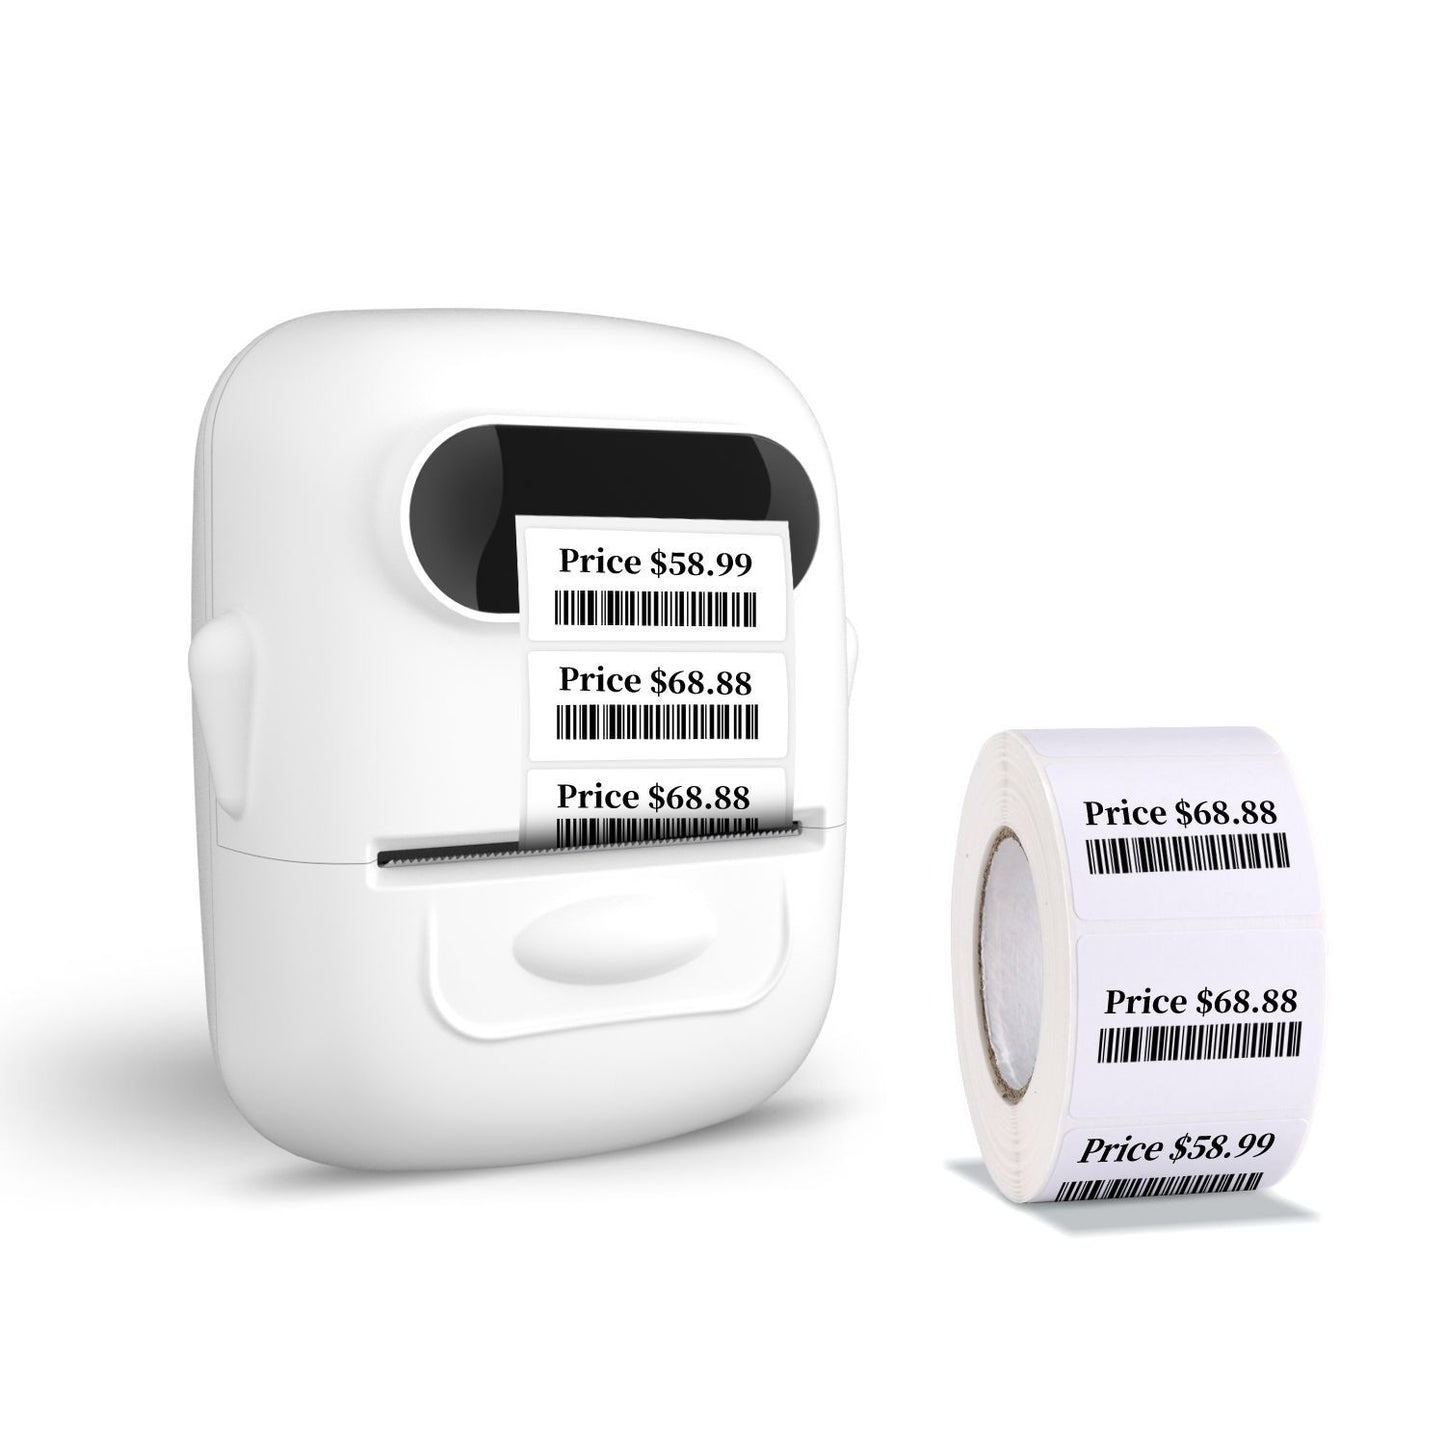 P50 Barcode Label Printer For Home And Business